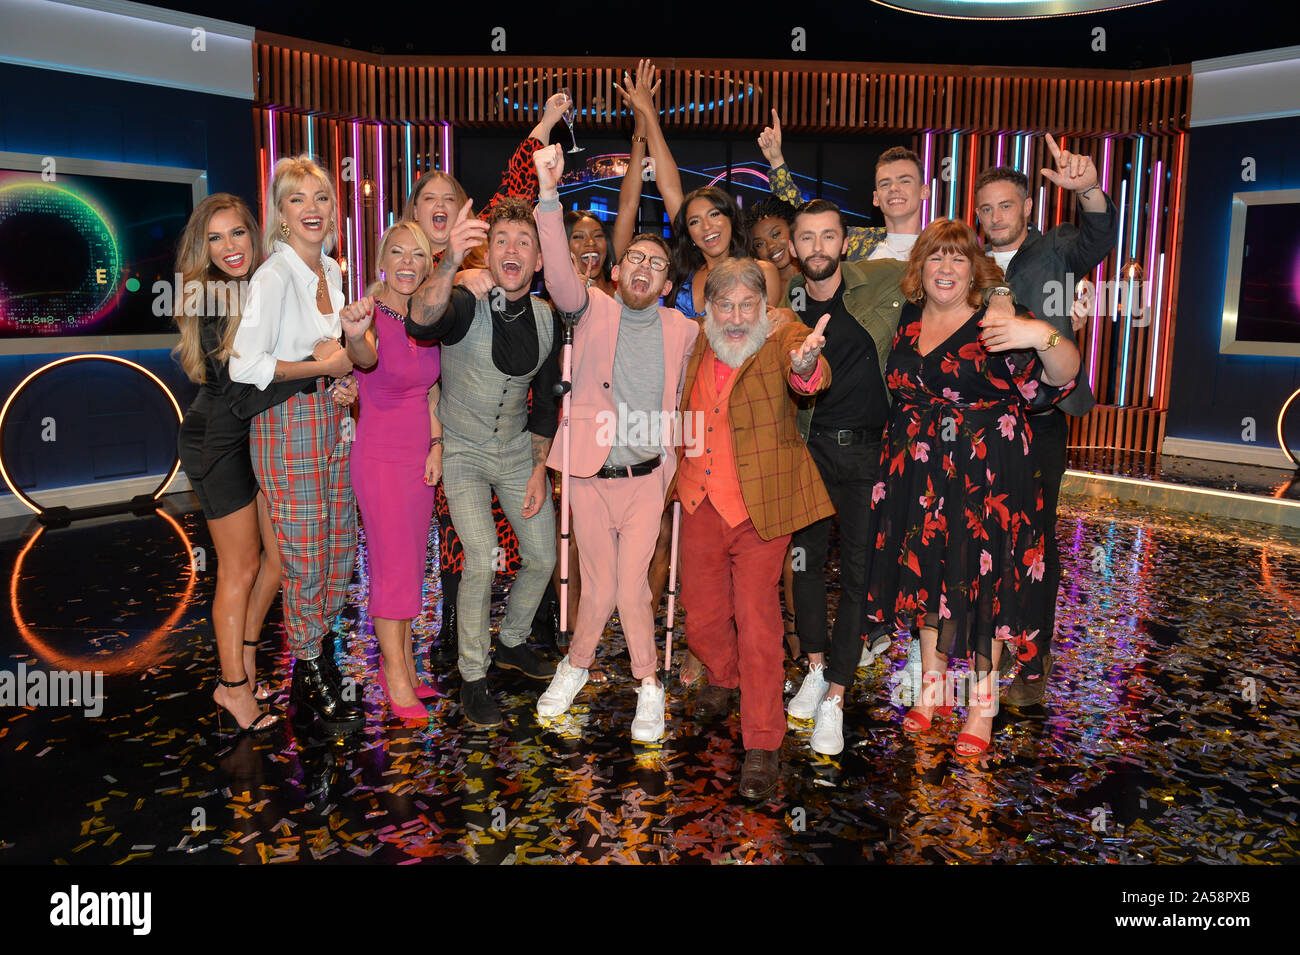 (left to right) Beth Dunlavey, Emelle Smith, Katie Roe Carr, Jack Quirk, Ella May, winner Paddy Smyth, Brooke Odunbaku, Georgina Elliott, Viewer's Champion Tim Wilson, Busayo Twins, James Doran, Woody Cook, Jan Jones and Sy Jennings celebrating after the final of the second series of Channel 4's The Circle in Salford, Manchester. Stock Photo